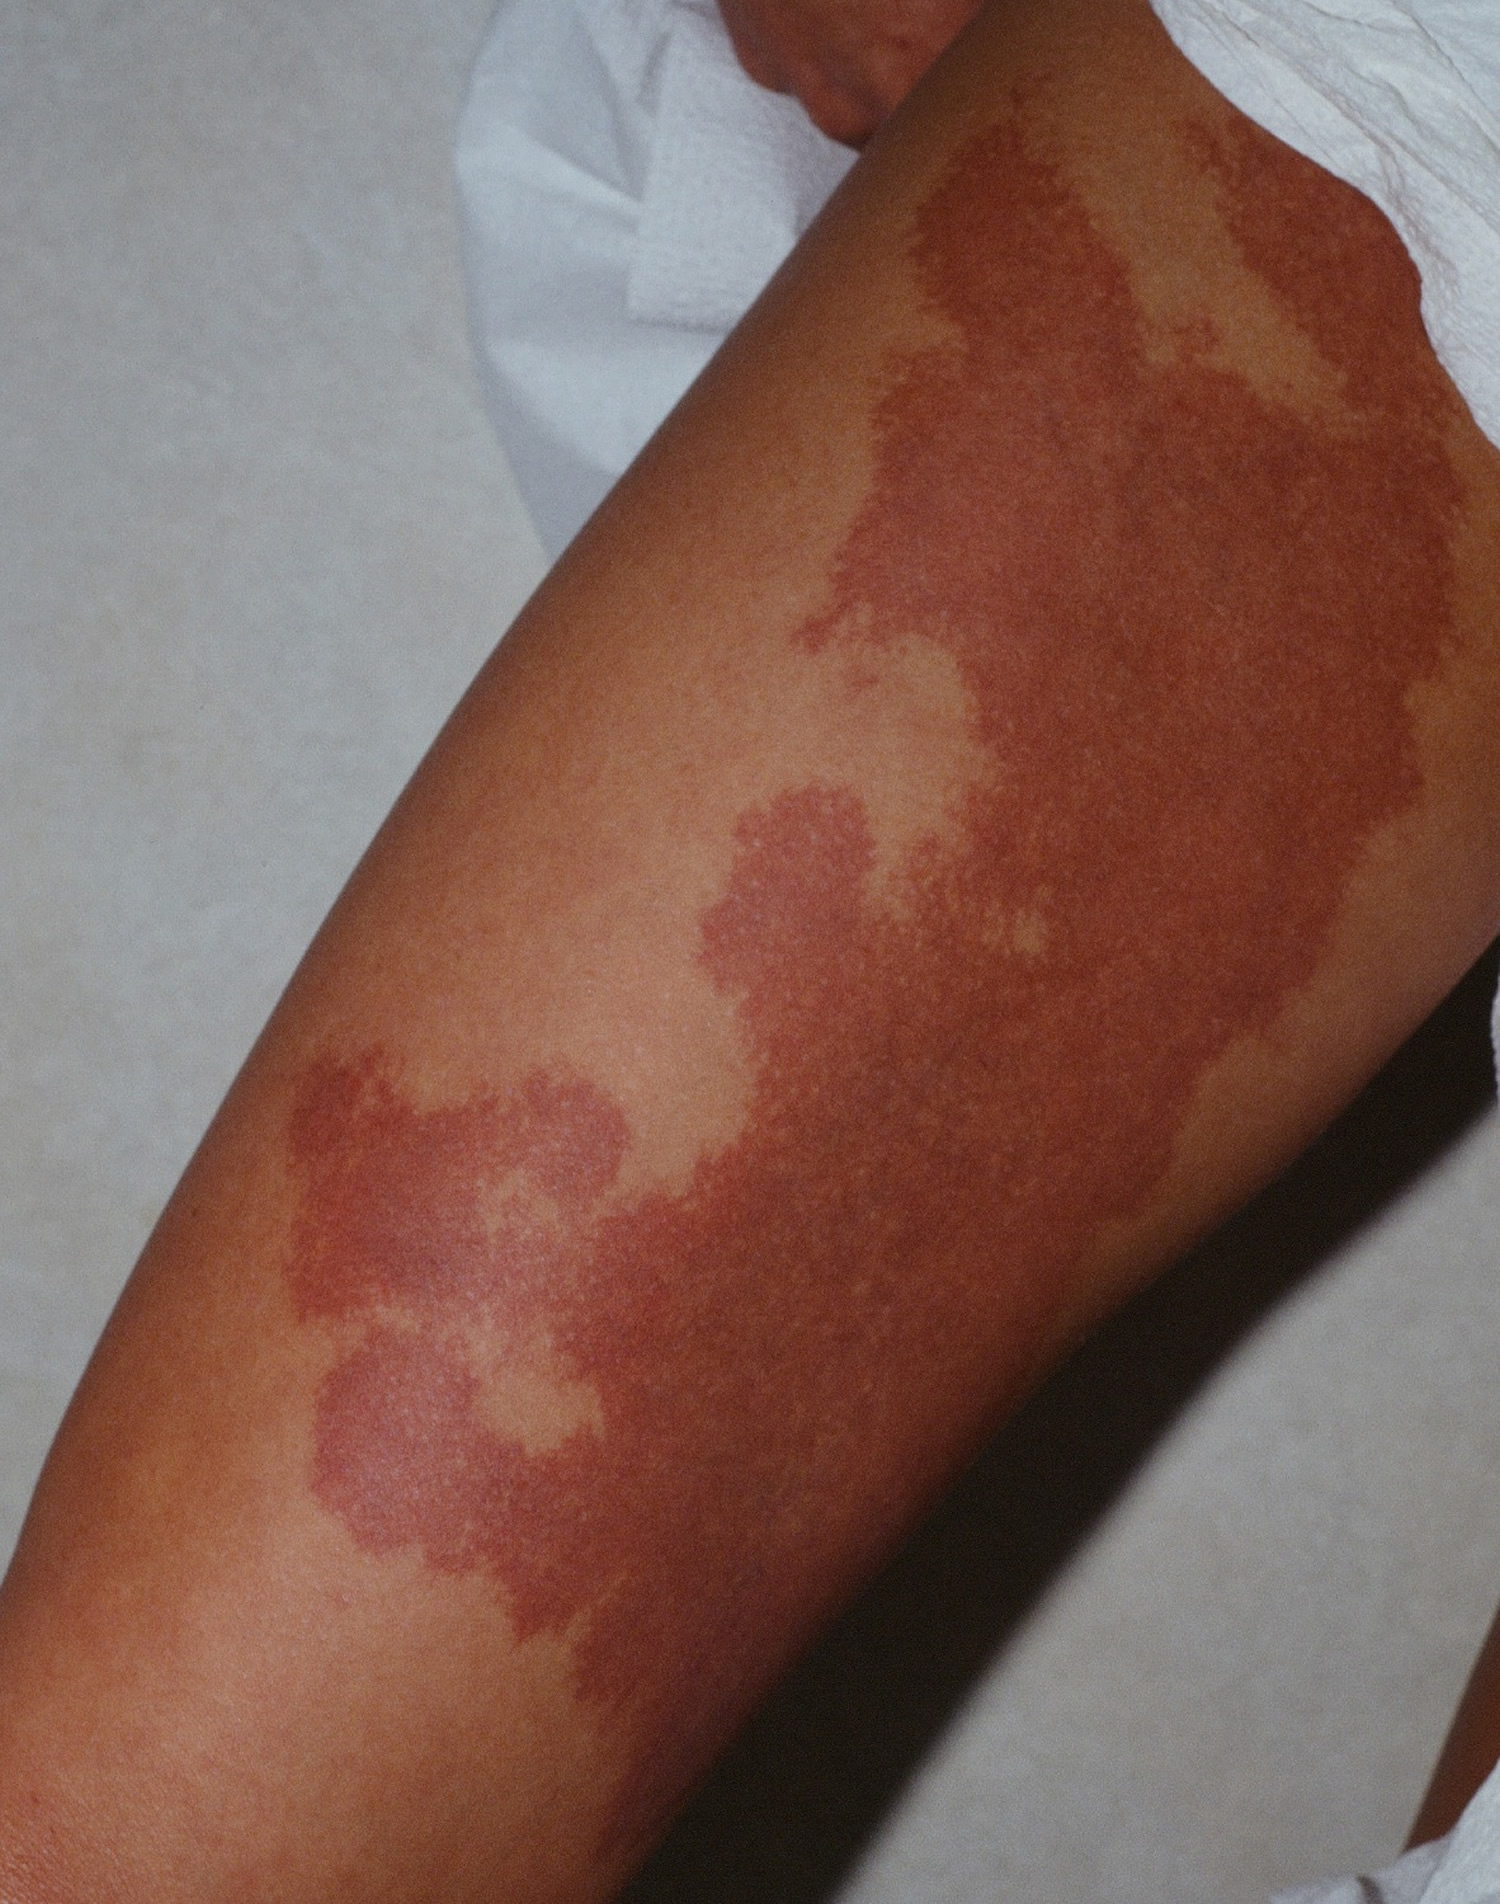 klippel trenaunay syndrome - port wine stain